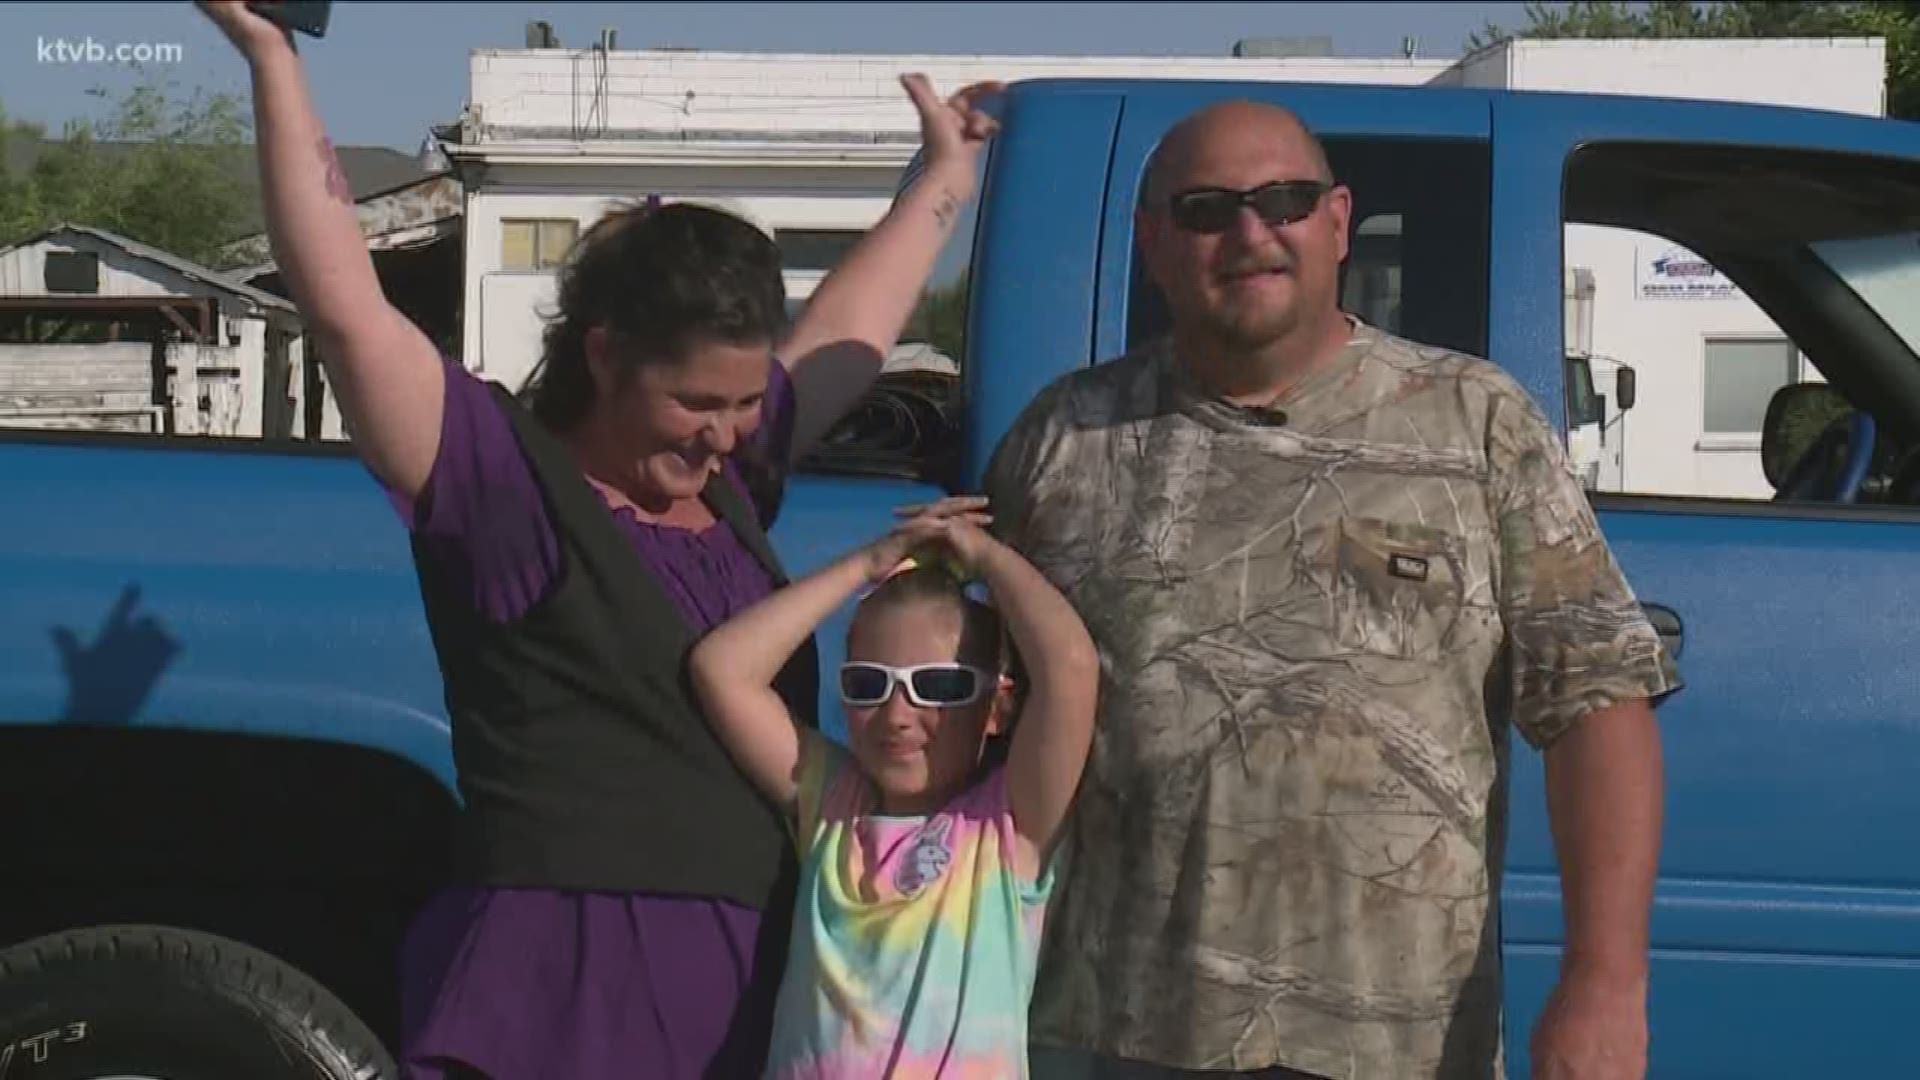 A group called Rebuilding Generations helped a family with some serious truck trouble, but not enough resources to fix it.